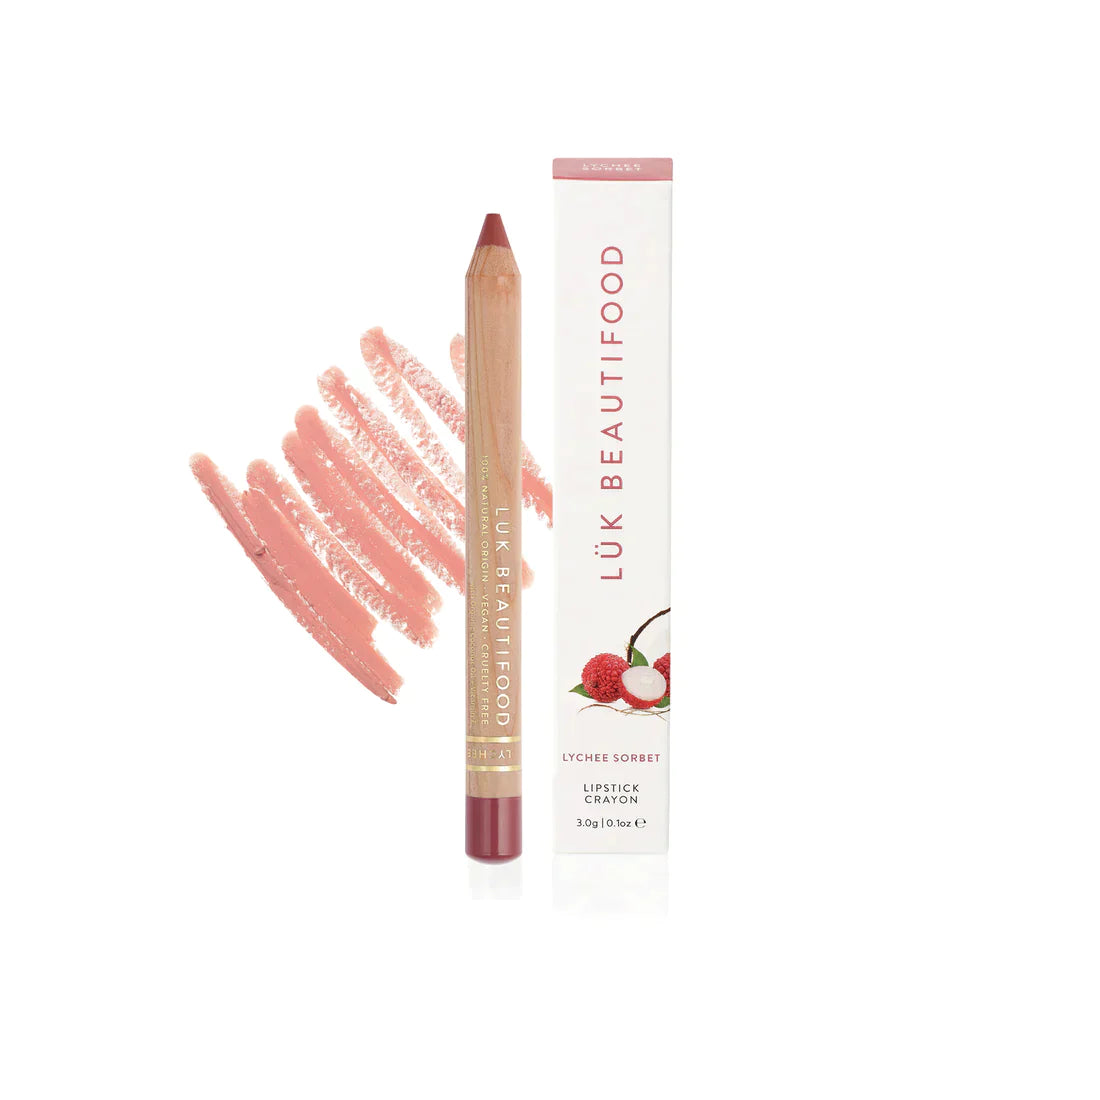 Natural Lipstick Crayon in Berry Bite